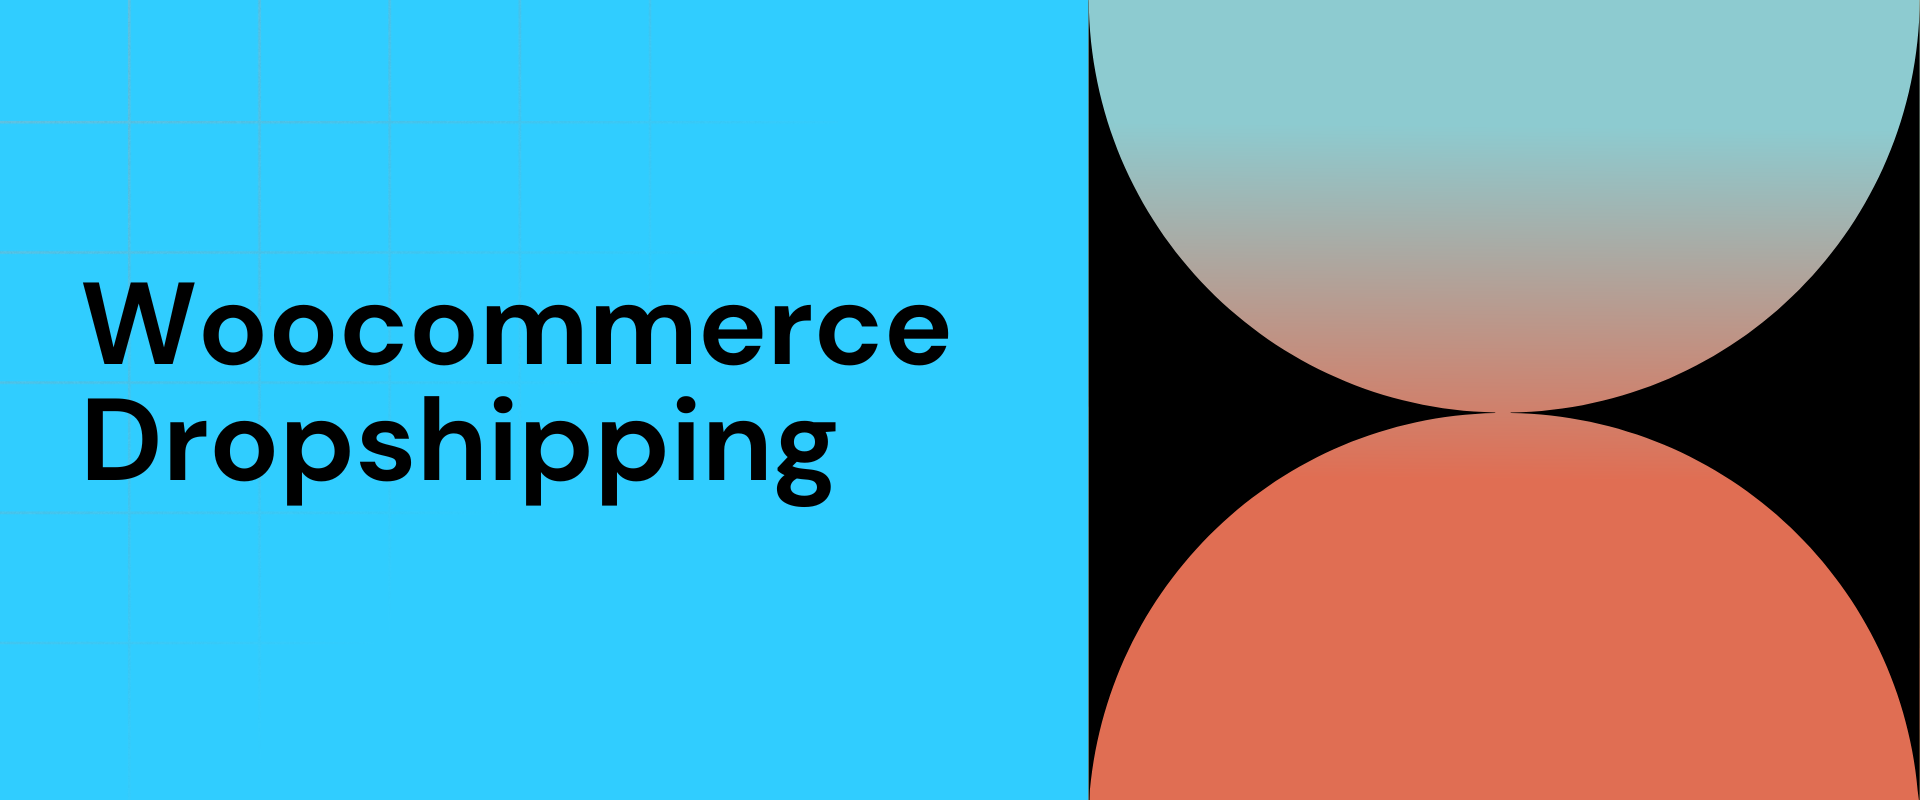 Ultimate Guide to Woocommerce Dropshipping